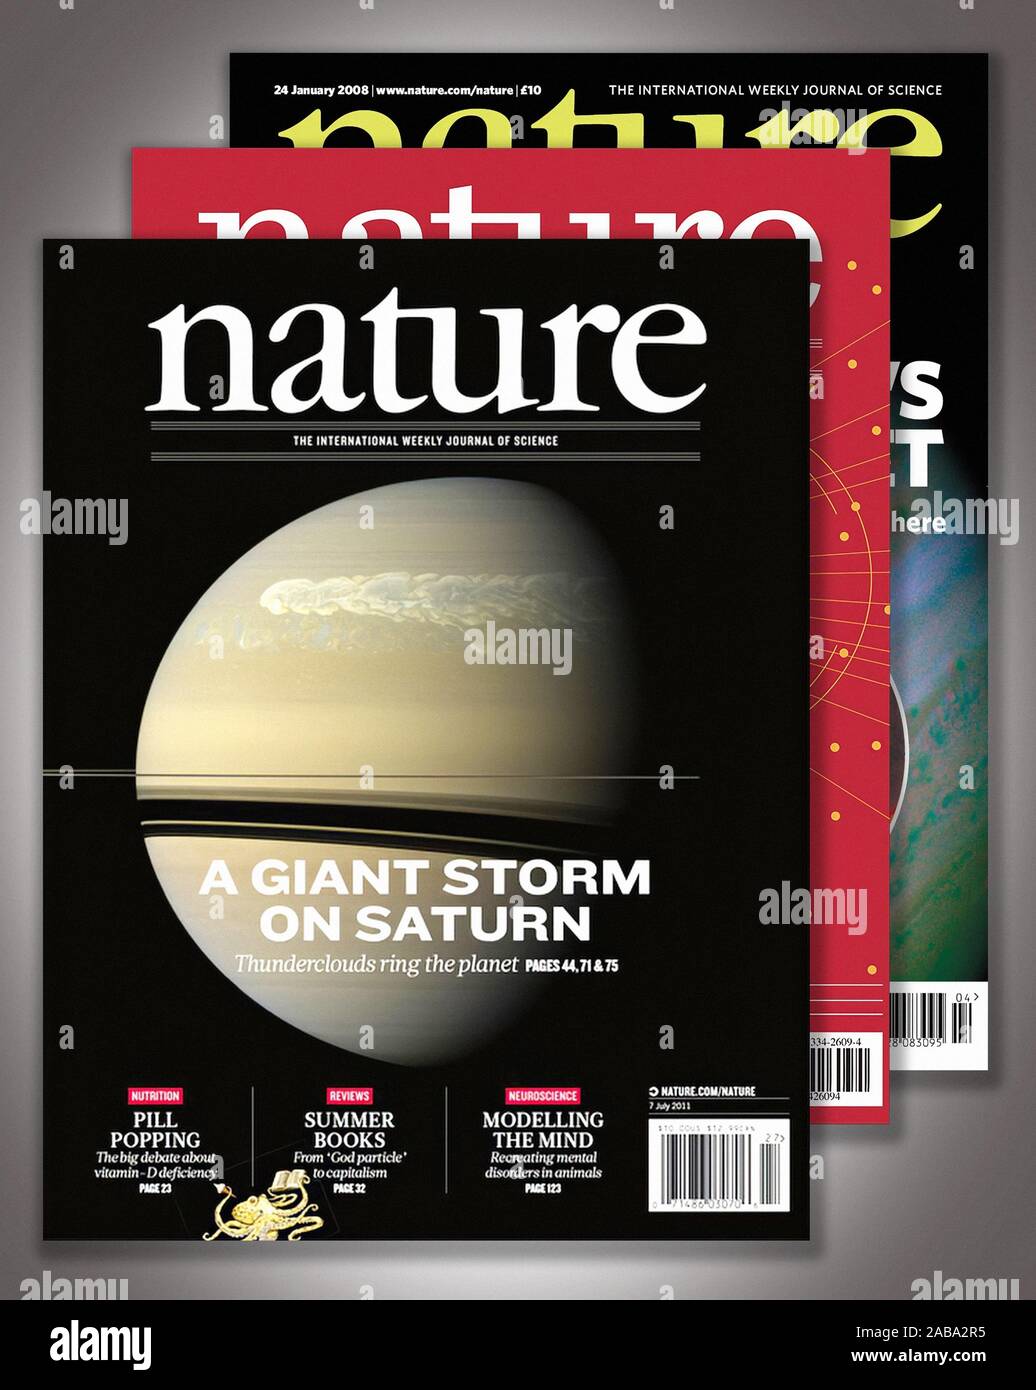 Nature Magazine Cover High Resolution Stock Photography and Images - Alamy